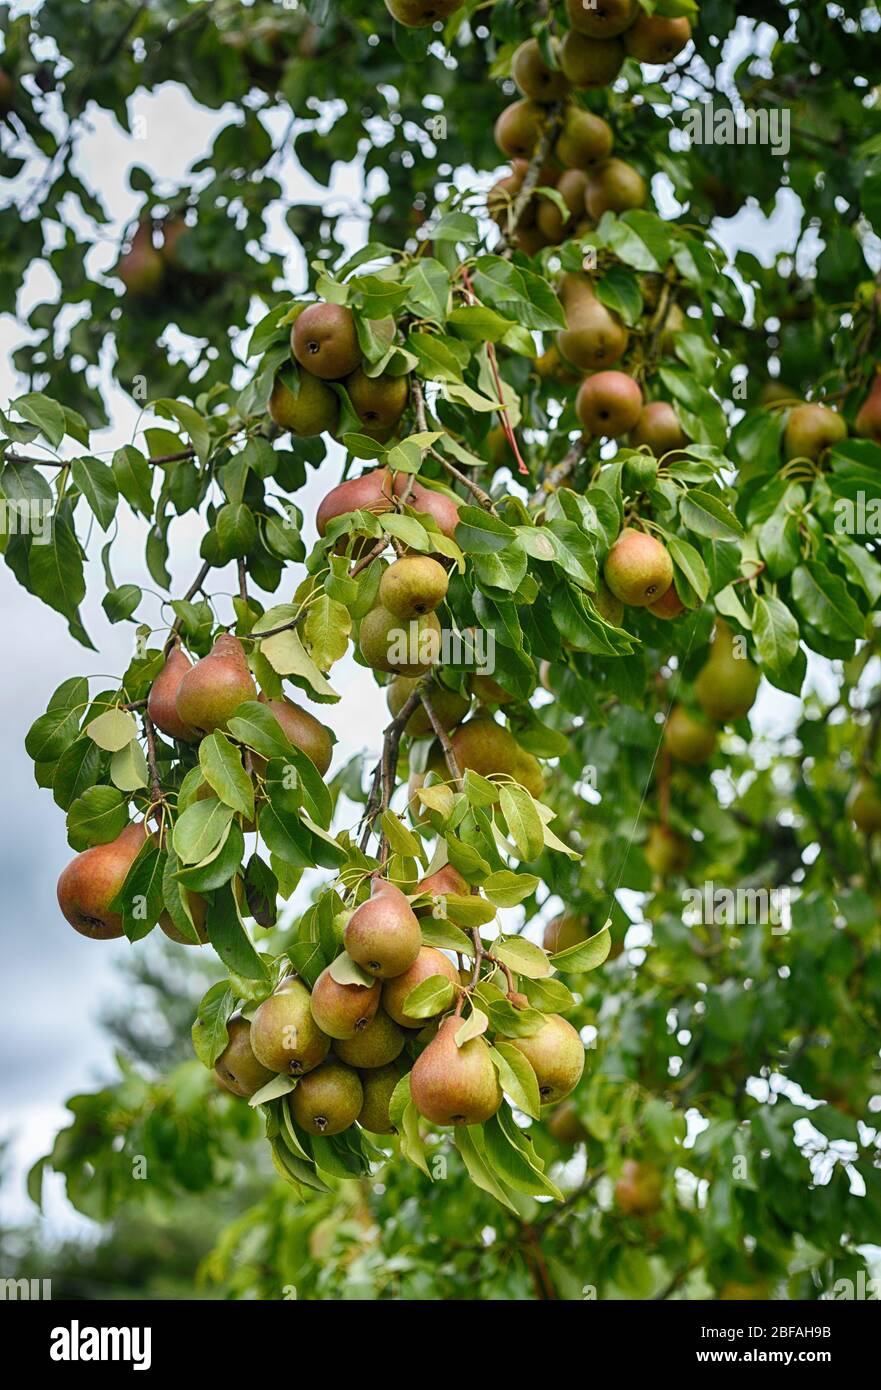 Pears on a tree Stock Photo